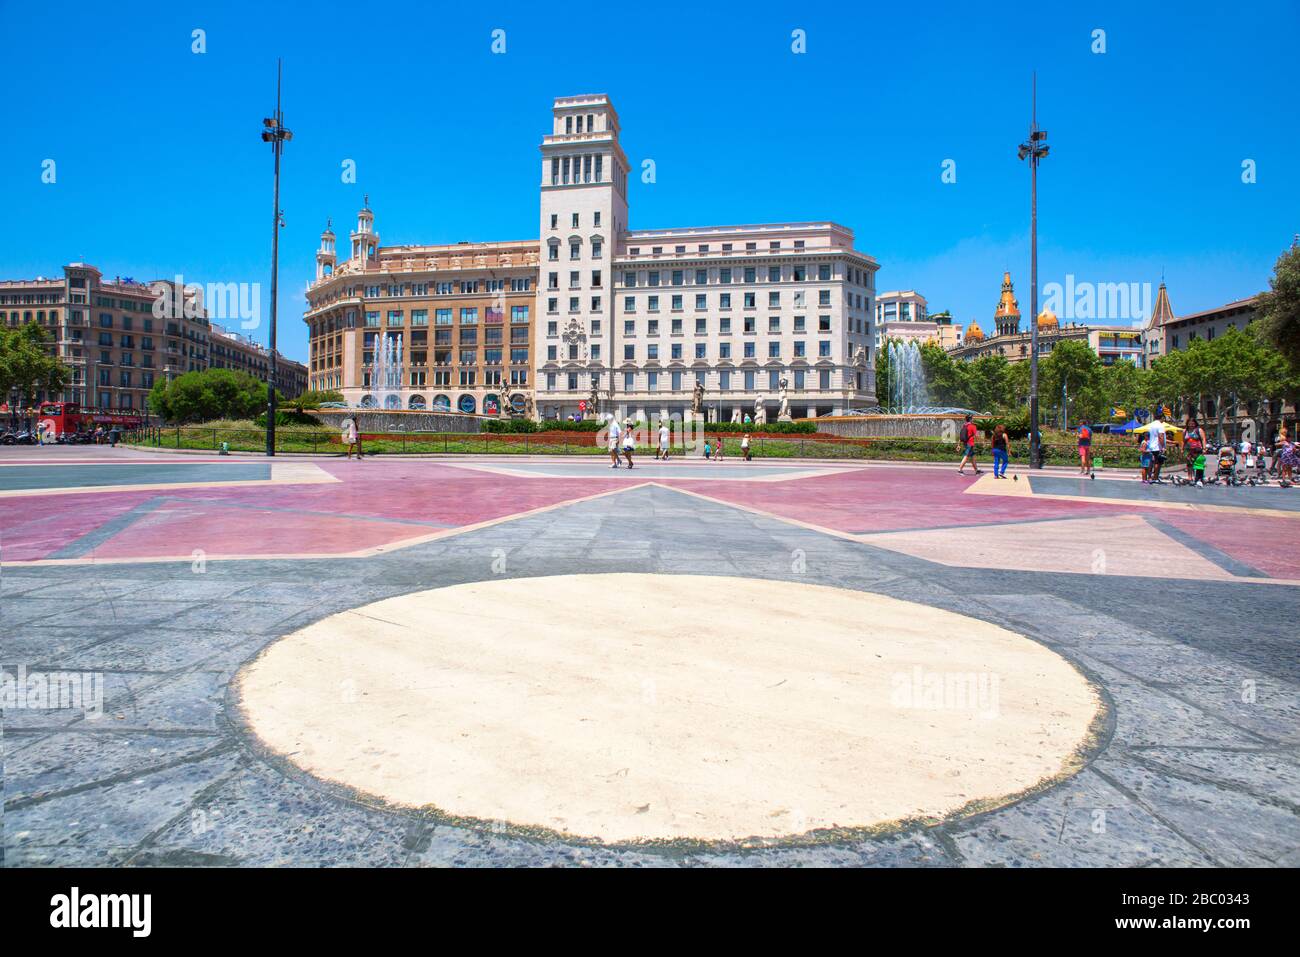 BARCELONA, SPAIN - JULY 10: A view of Placa Catalunya on July 10, 2015 in Barcelona, Spain. This square is considered to be the city center and some o Stock Photo